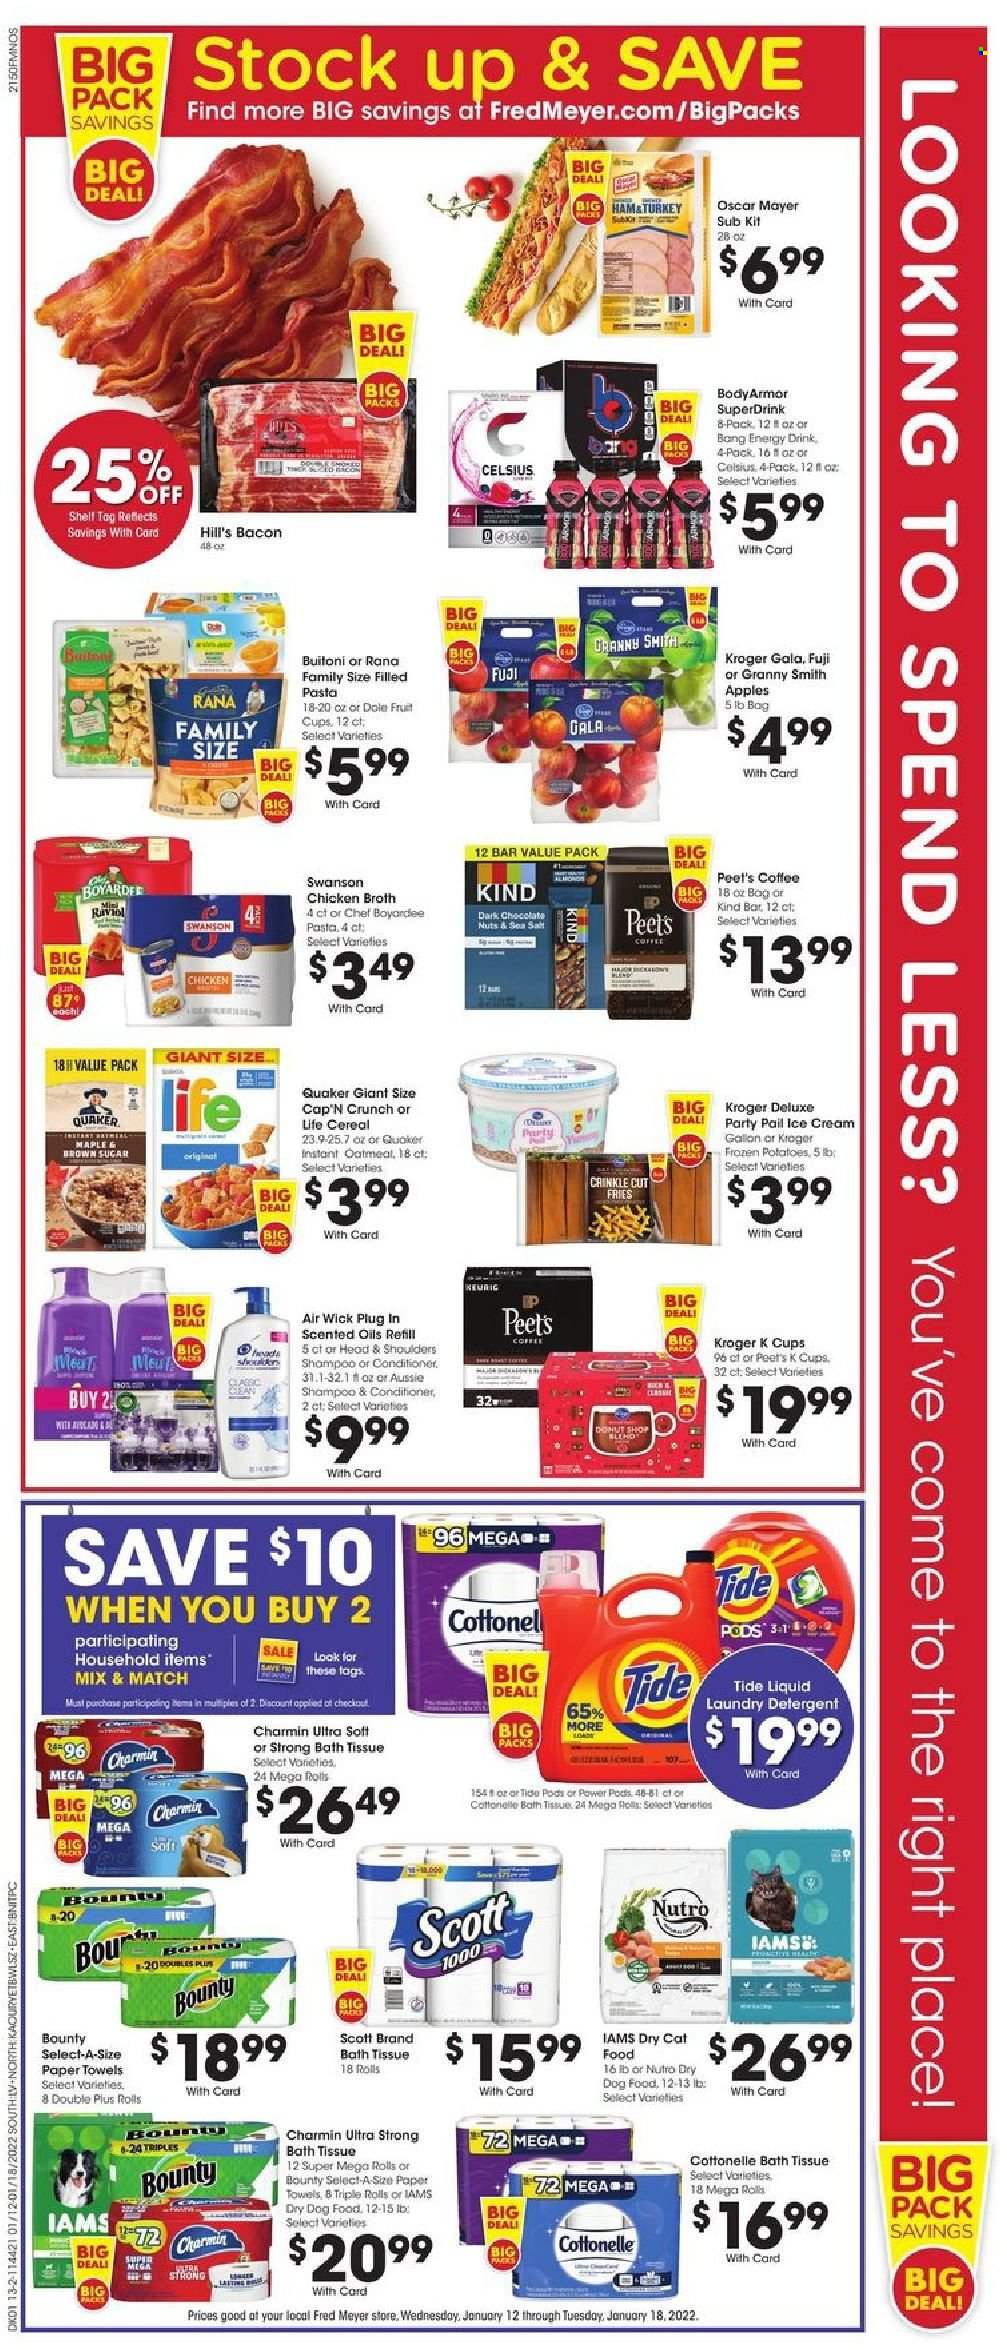 thumbnail - Fred Meyer Flyer - 01/12/2022 - 01/18/2022 - Sales products - Scott, fruit cup, potatoes, Dole, apples, Gala, Granny Smith, pasta, Quaker, Rana, Buitoni, filled pasta, bacon, ham, Oscar Mayer, ice cream, potato fries, Bounty, dark chocolate, chicken broth, oatmeal, salt, broth, Chef Boyardee, cereals, Cap'n Crunch, energy drink, coffee, coffee capsules, K-Cups, bath tissue, Cottonelle, kitchen towels, paper towels, Charmin, detergent, Tide, laundry detergent, shampoo, Aussie, conditioner, Air Wick, animal food, cat food, dog food, Hill's, dry dog food, dry cat food, Iams, Ison. Page 2.